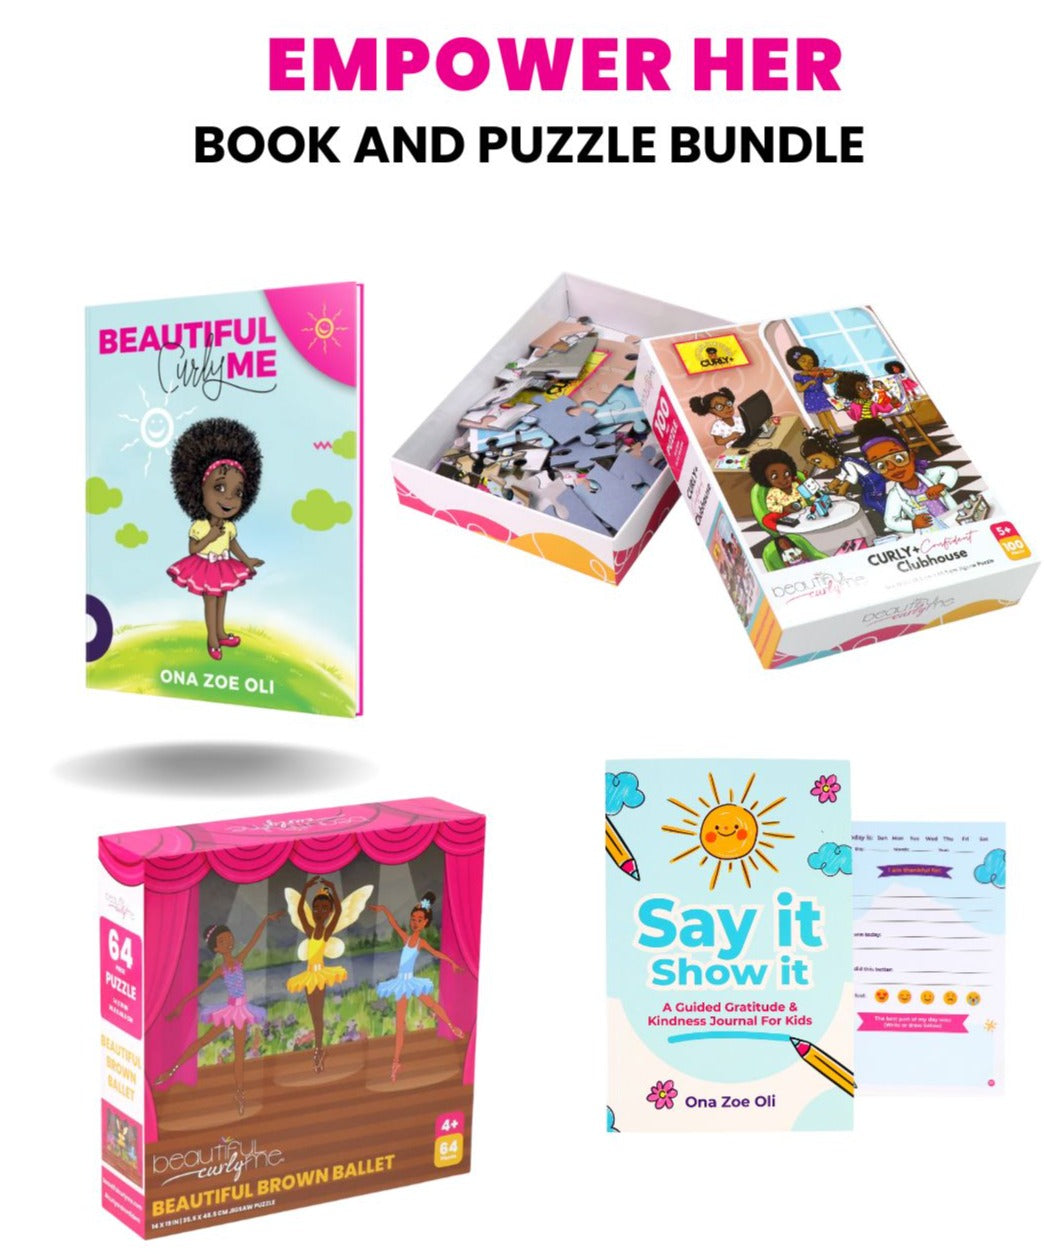 Empower Her Book and Puzzle Bundle